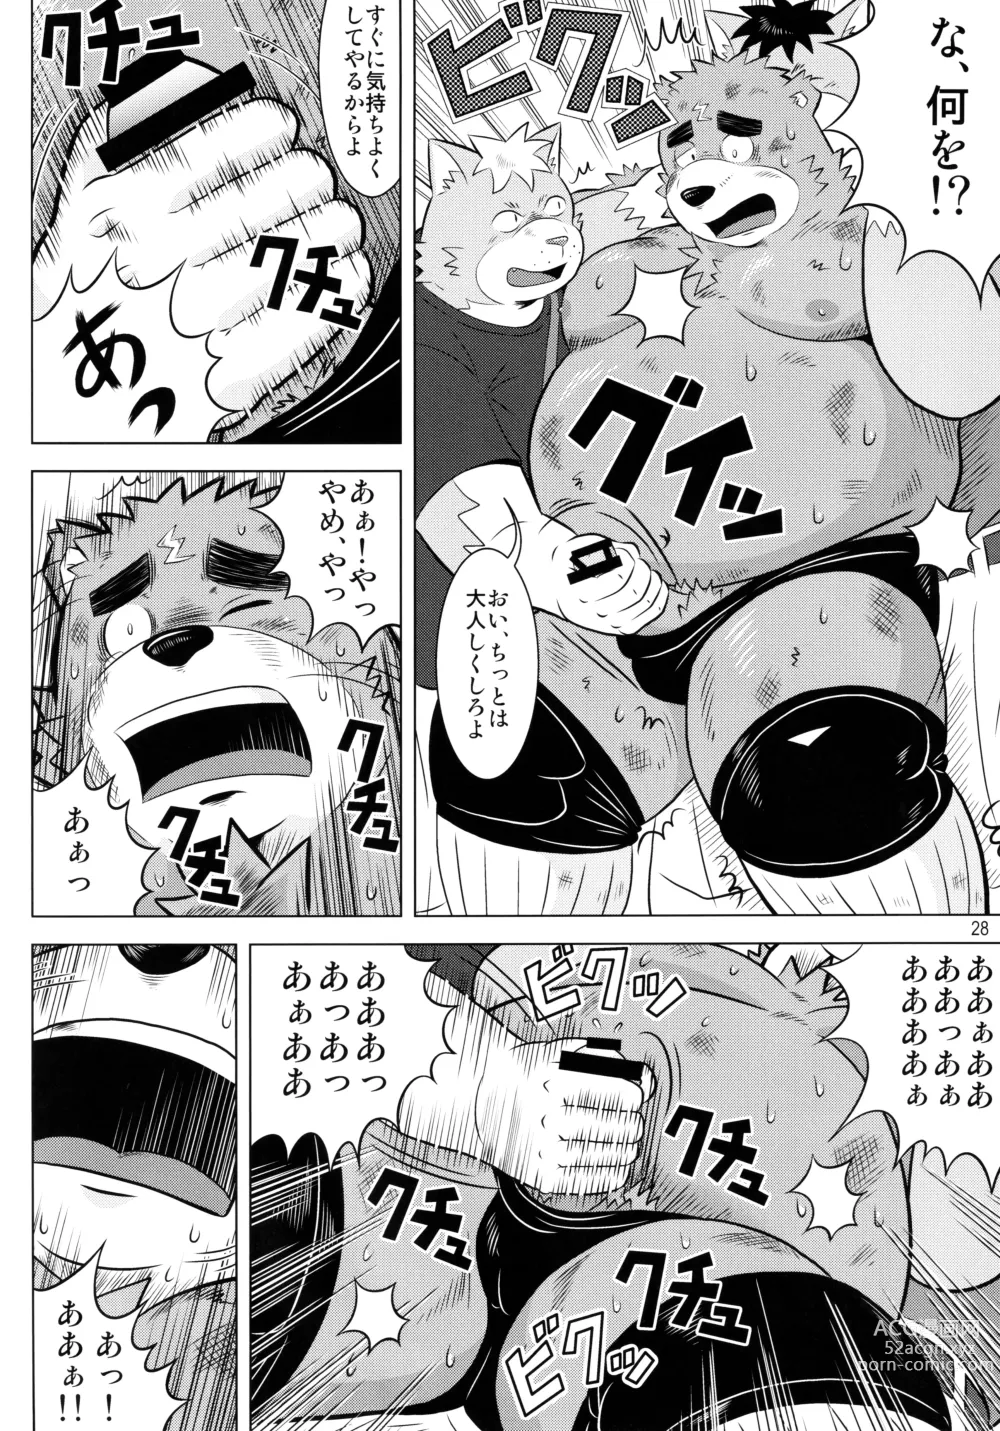 Page 29 of doujinshi BFW -BEAST FIGHTER WRESTLING-